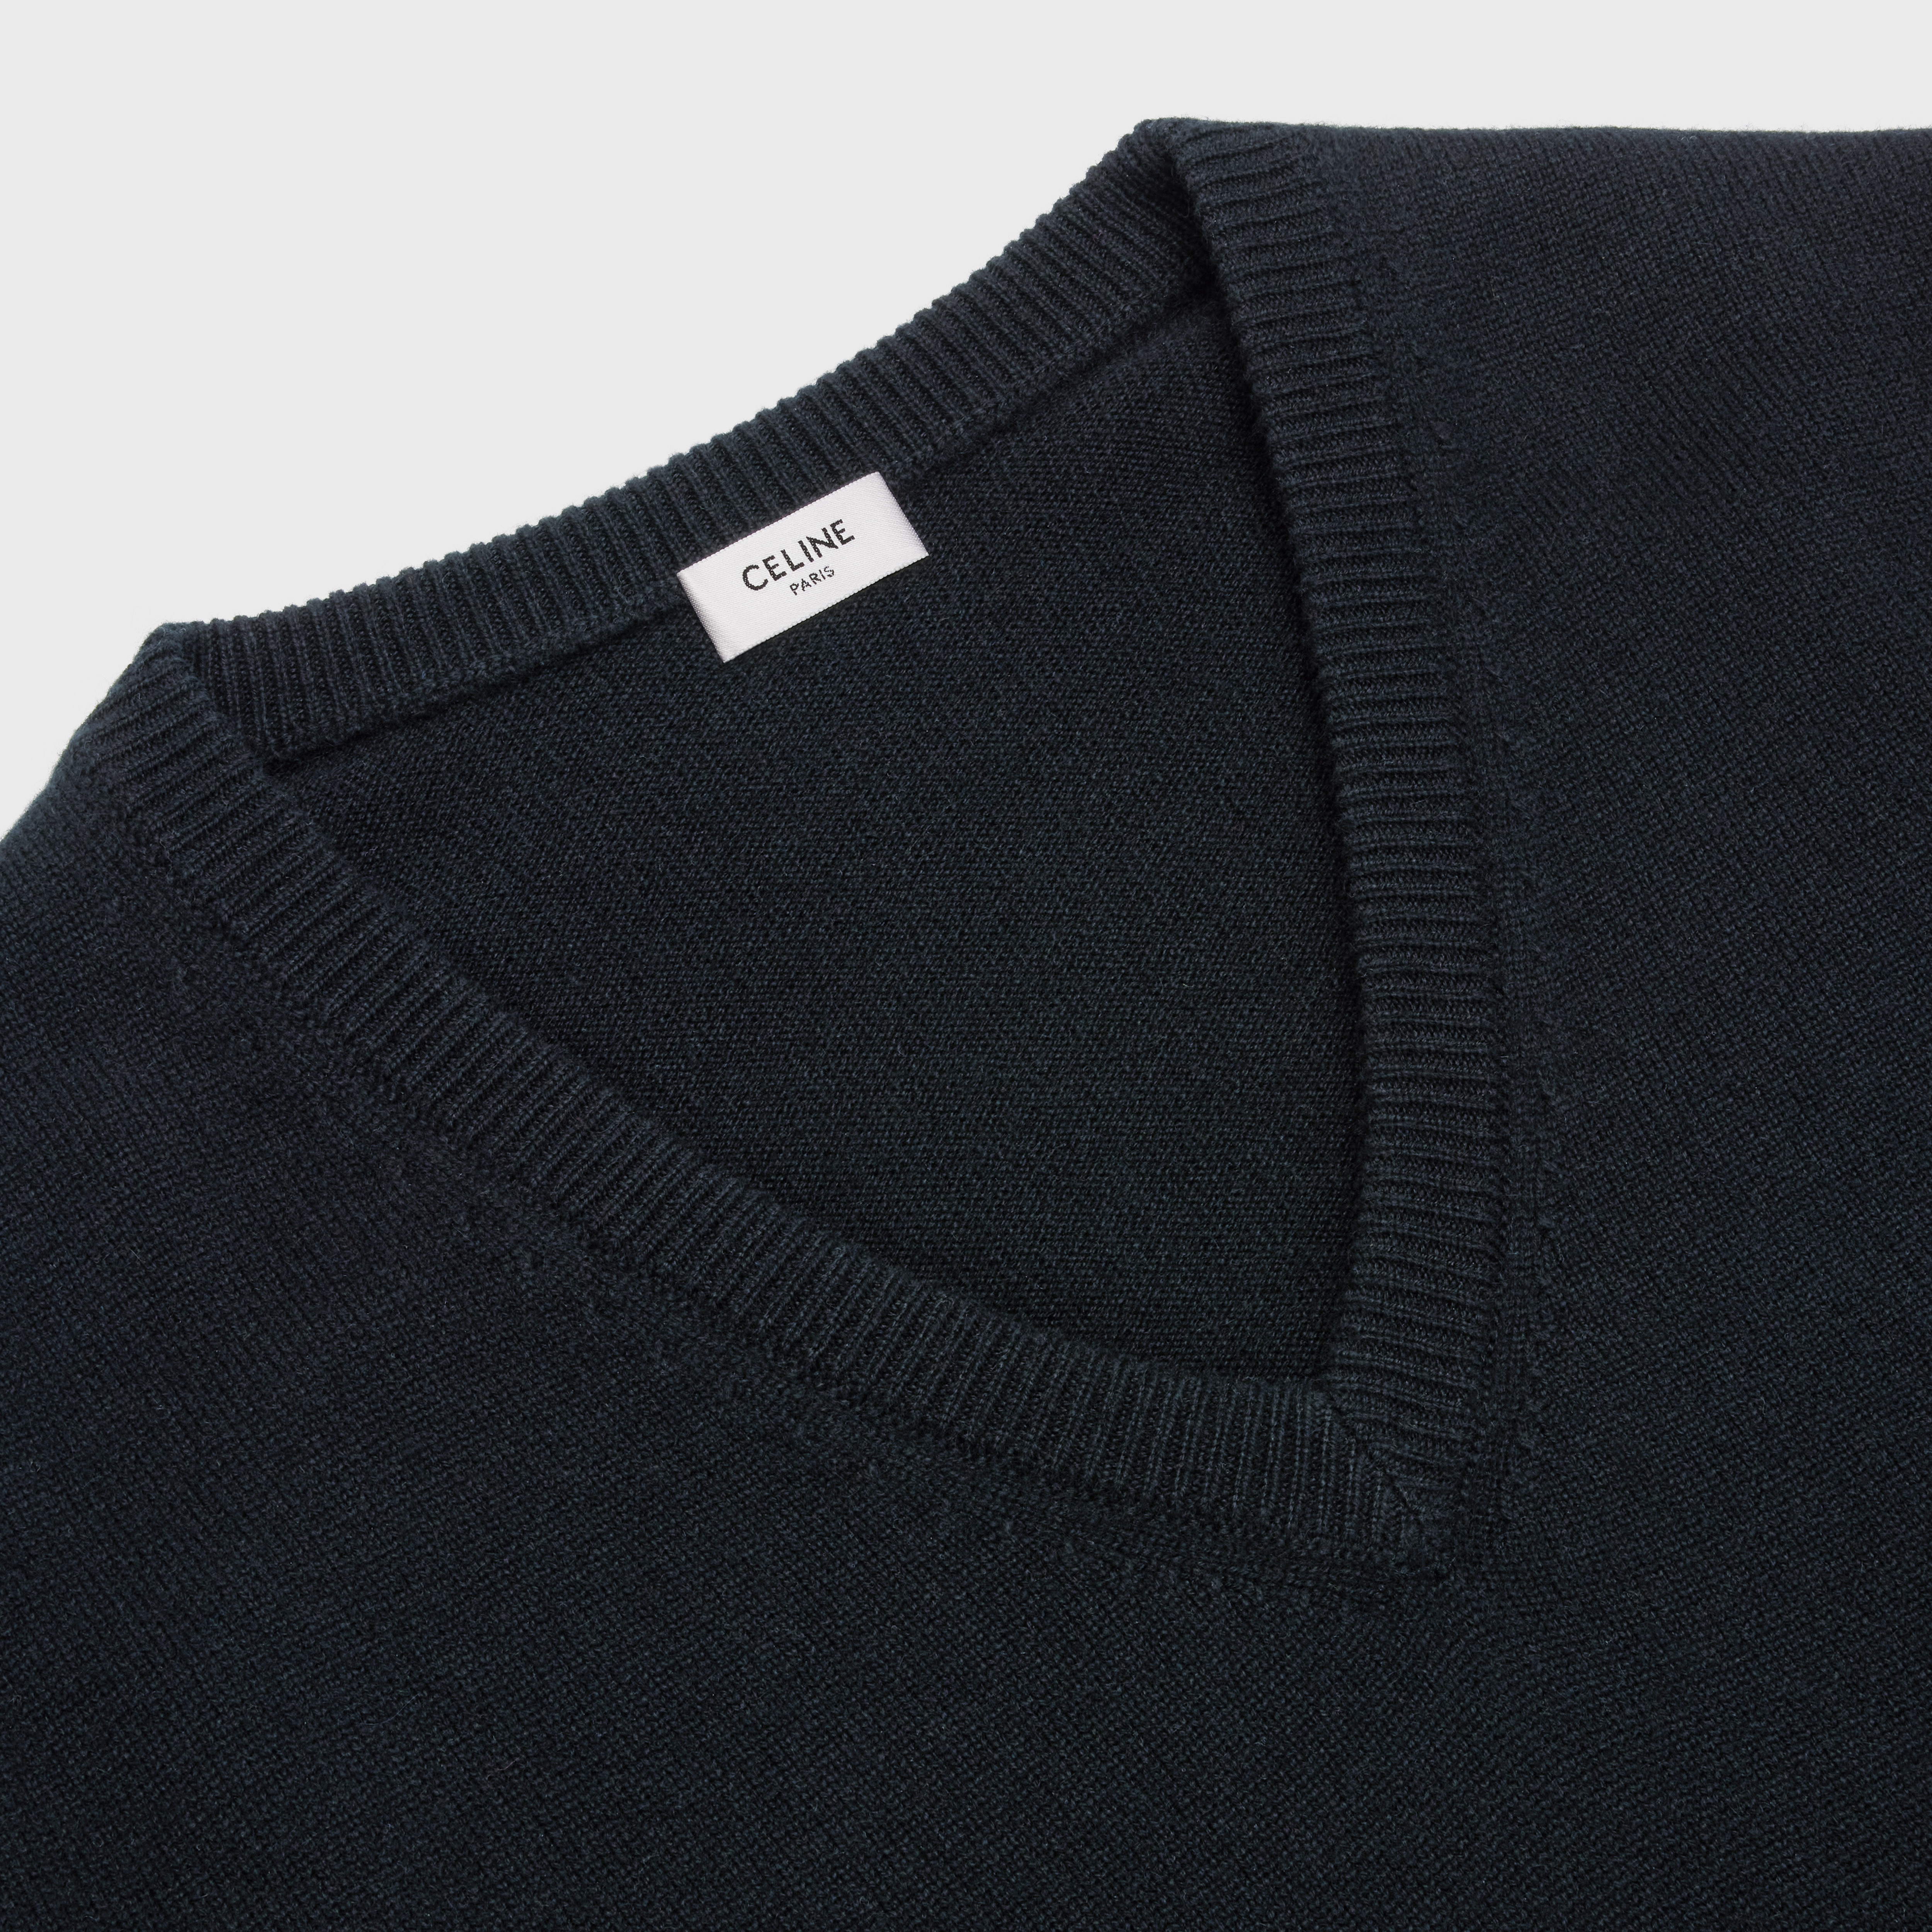 V-NECK SWEATER IN HERITAGE CASHMERE - 3